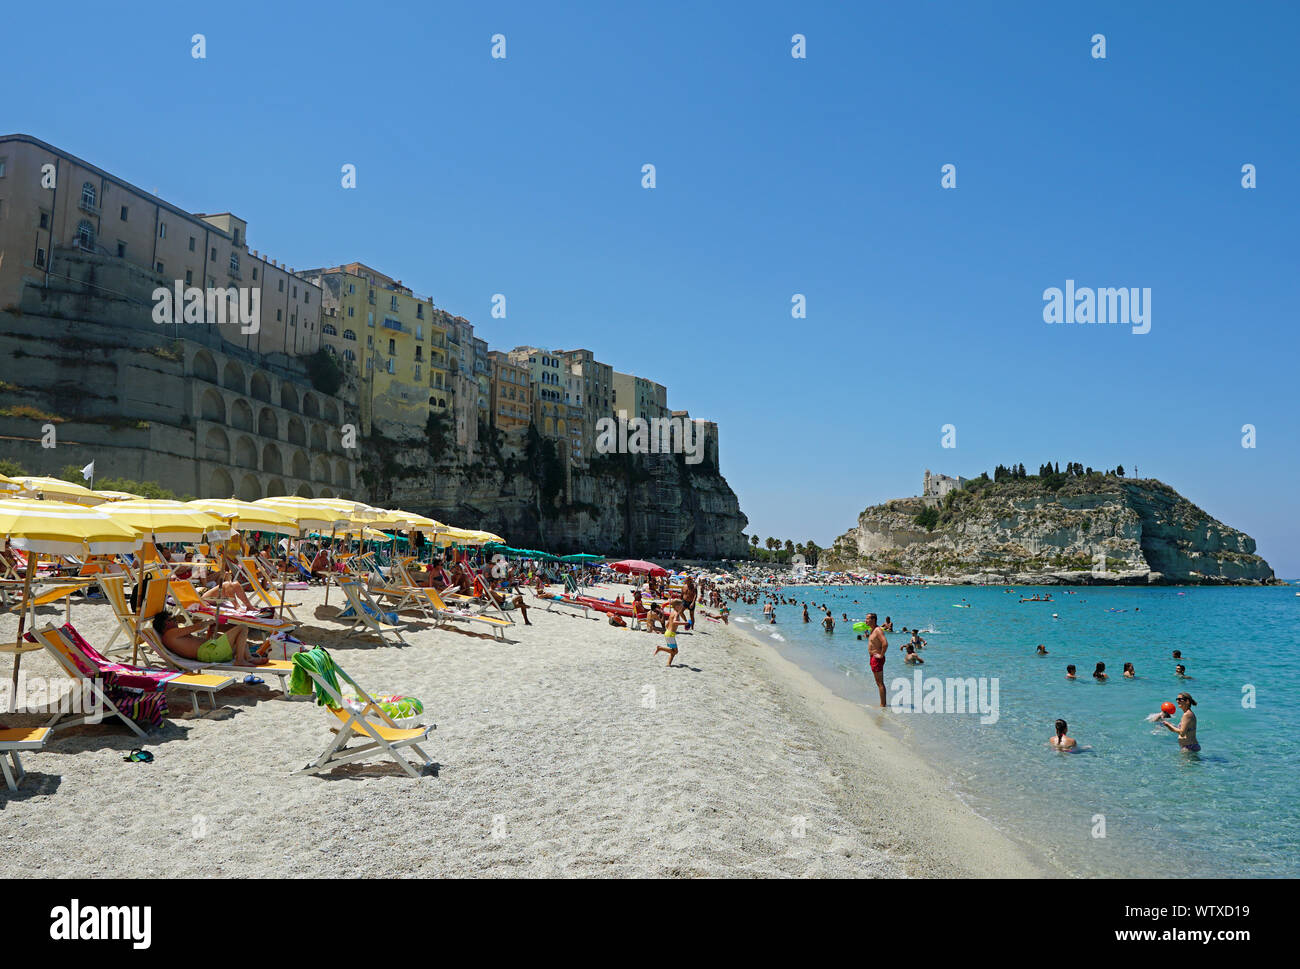 The public beach in Tropea, Calabria, Italy. View from the north, August 2019. There is the hill with the Church of Santa Maria dell'Isola at the back. Stock Photo